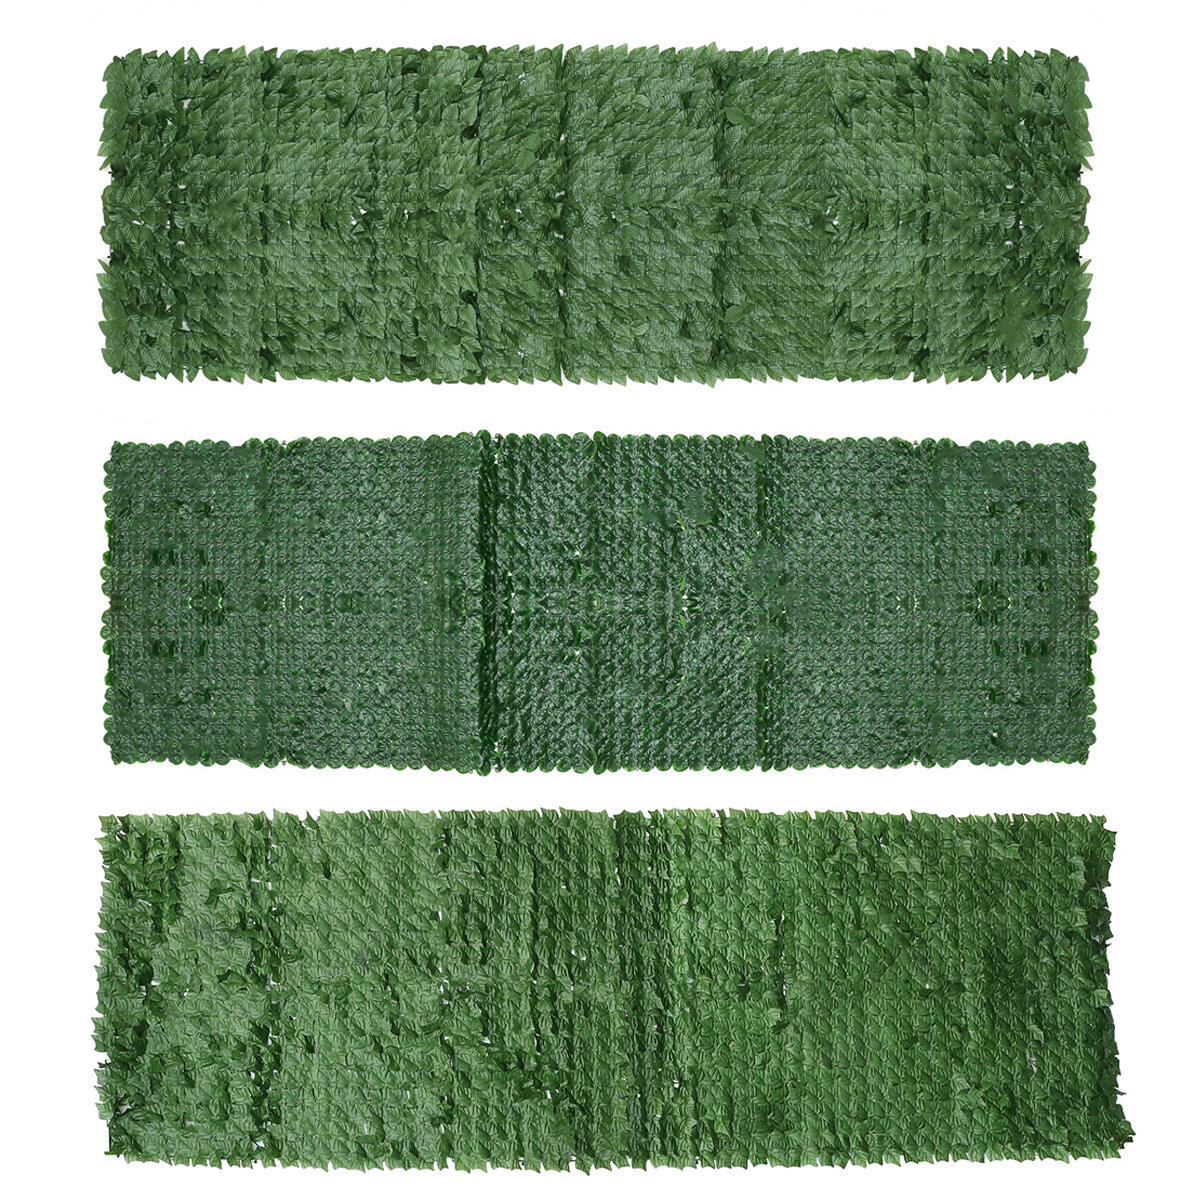 Image of 3Mx1M Artificial Faux Ivy Leaf Privacy Fence Screen Decor Panels Hedge GardenOutdoor Wall Cover